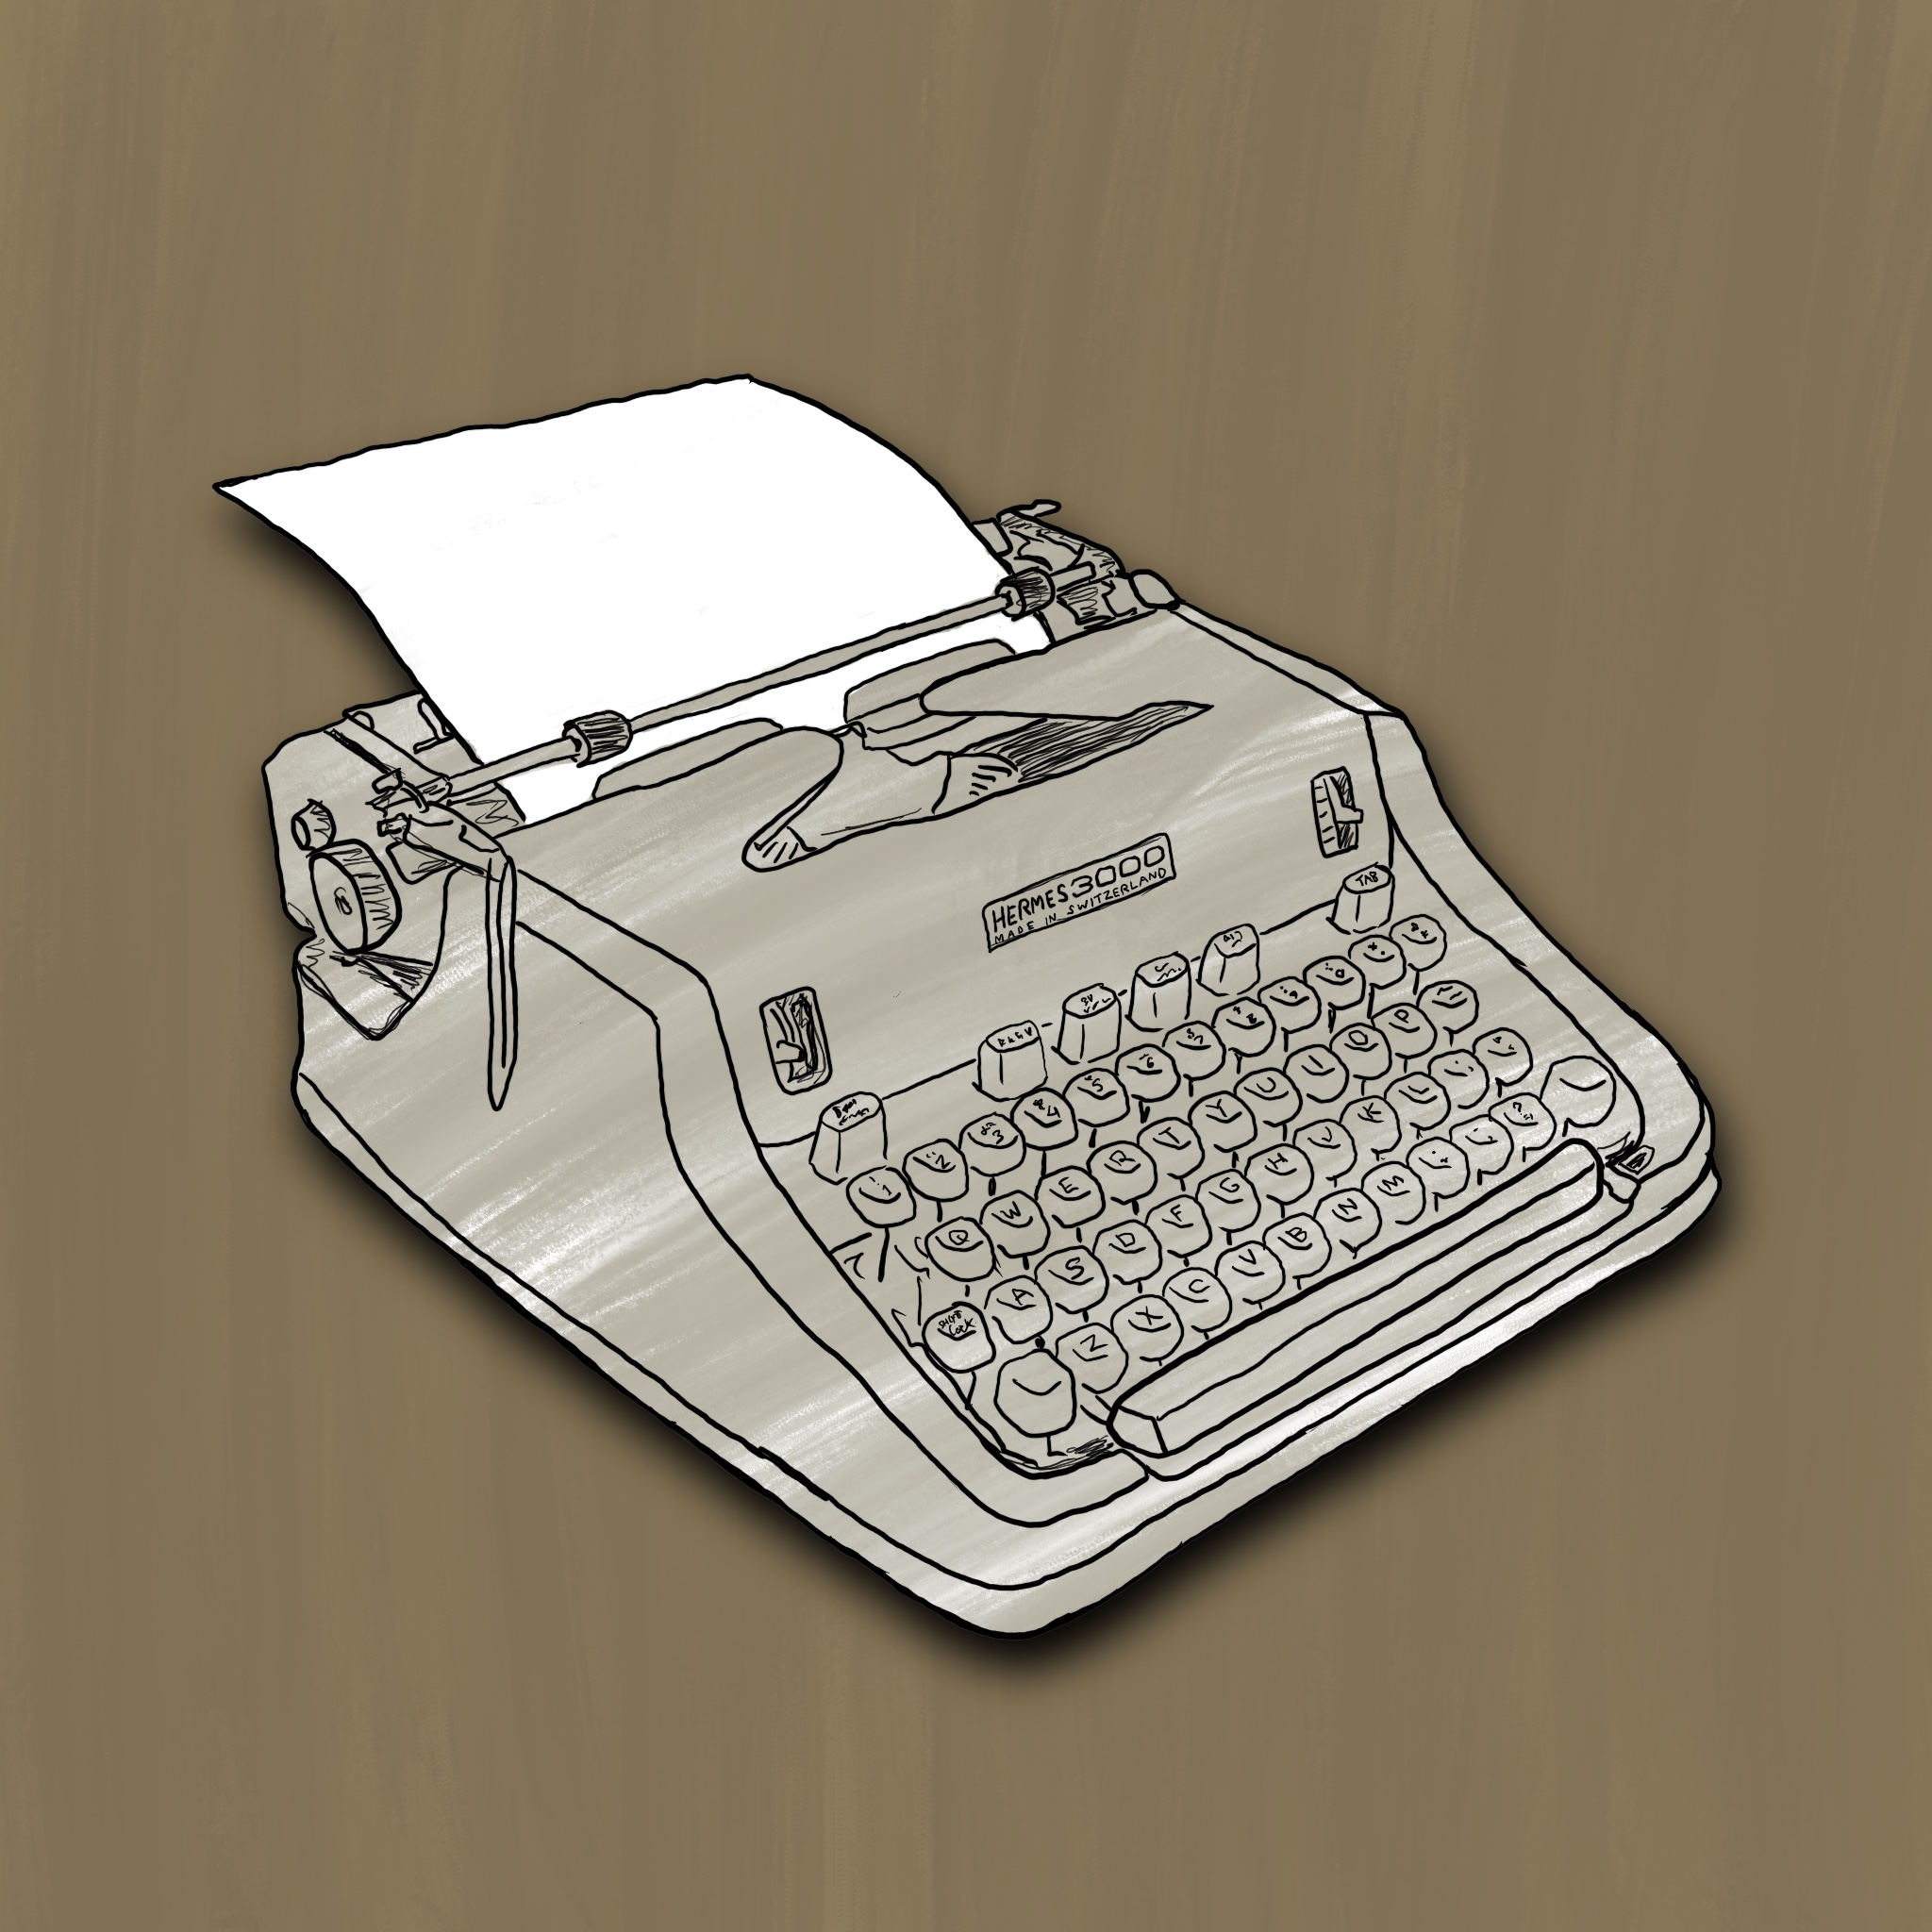 A sketch done in Procreate of a Hermes 3000 typewriter.